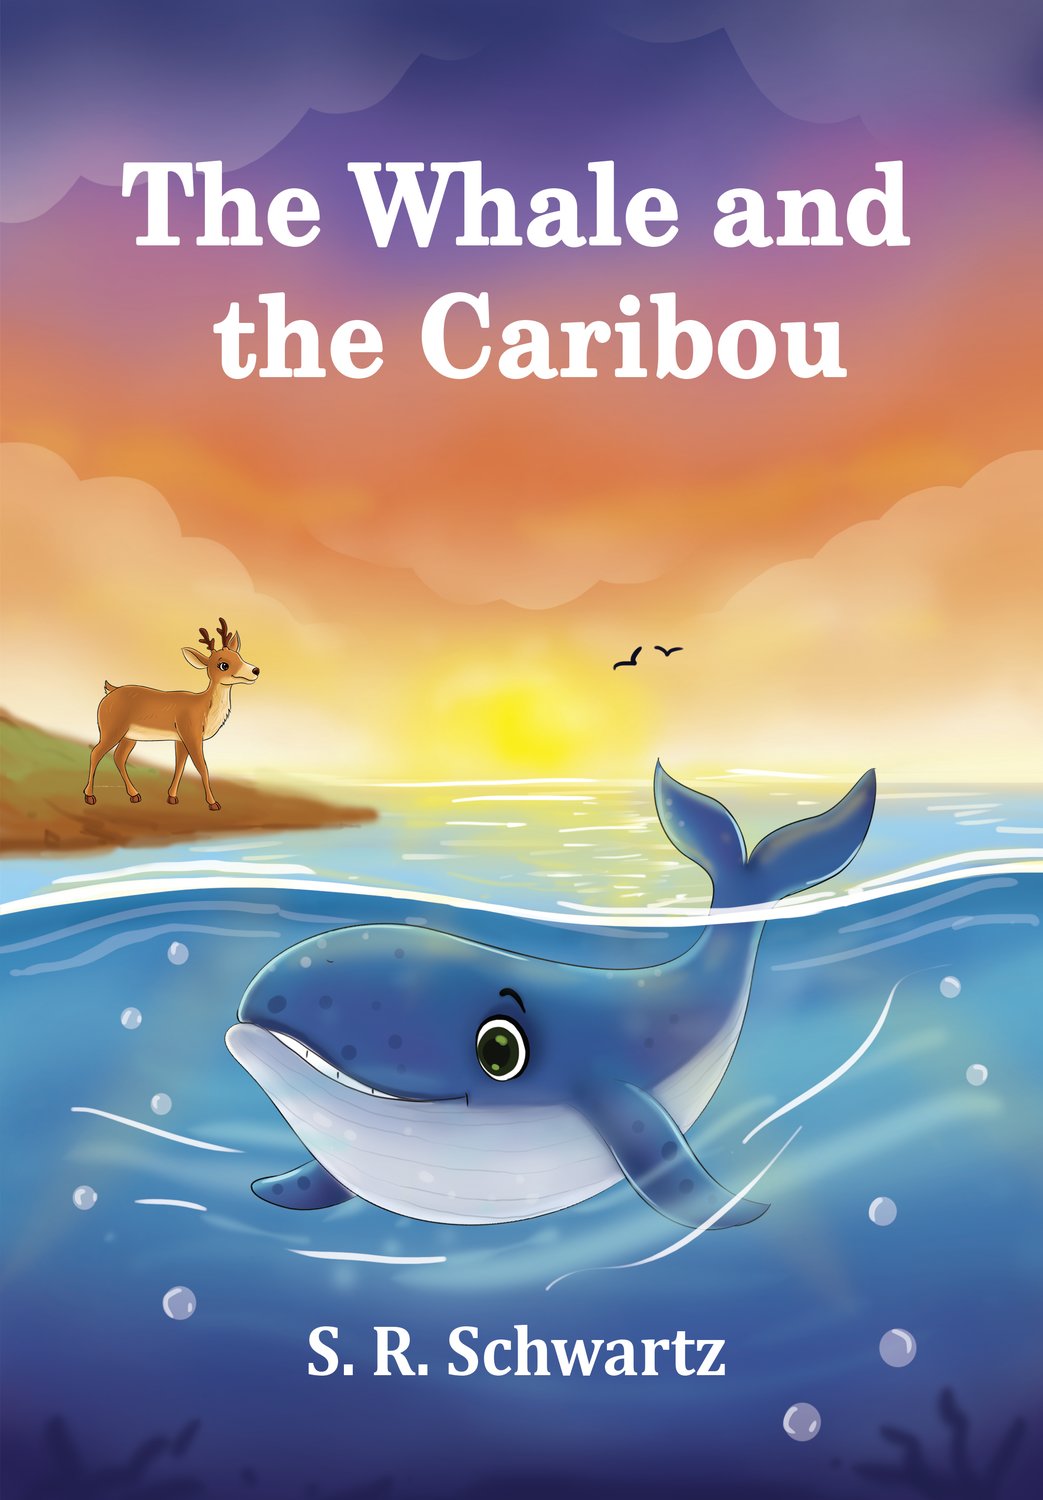 Bellmore-based author S.R. Schwartz hopes to tell stories that stick with a child. One of his books, “The Whale and the Caribou,” is now available for purchase on Amazon.